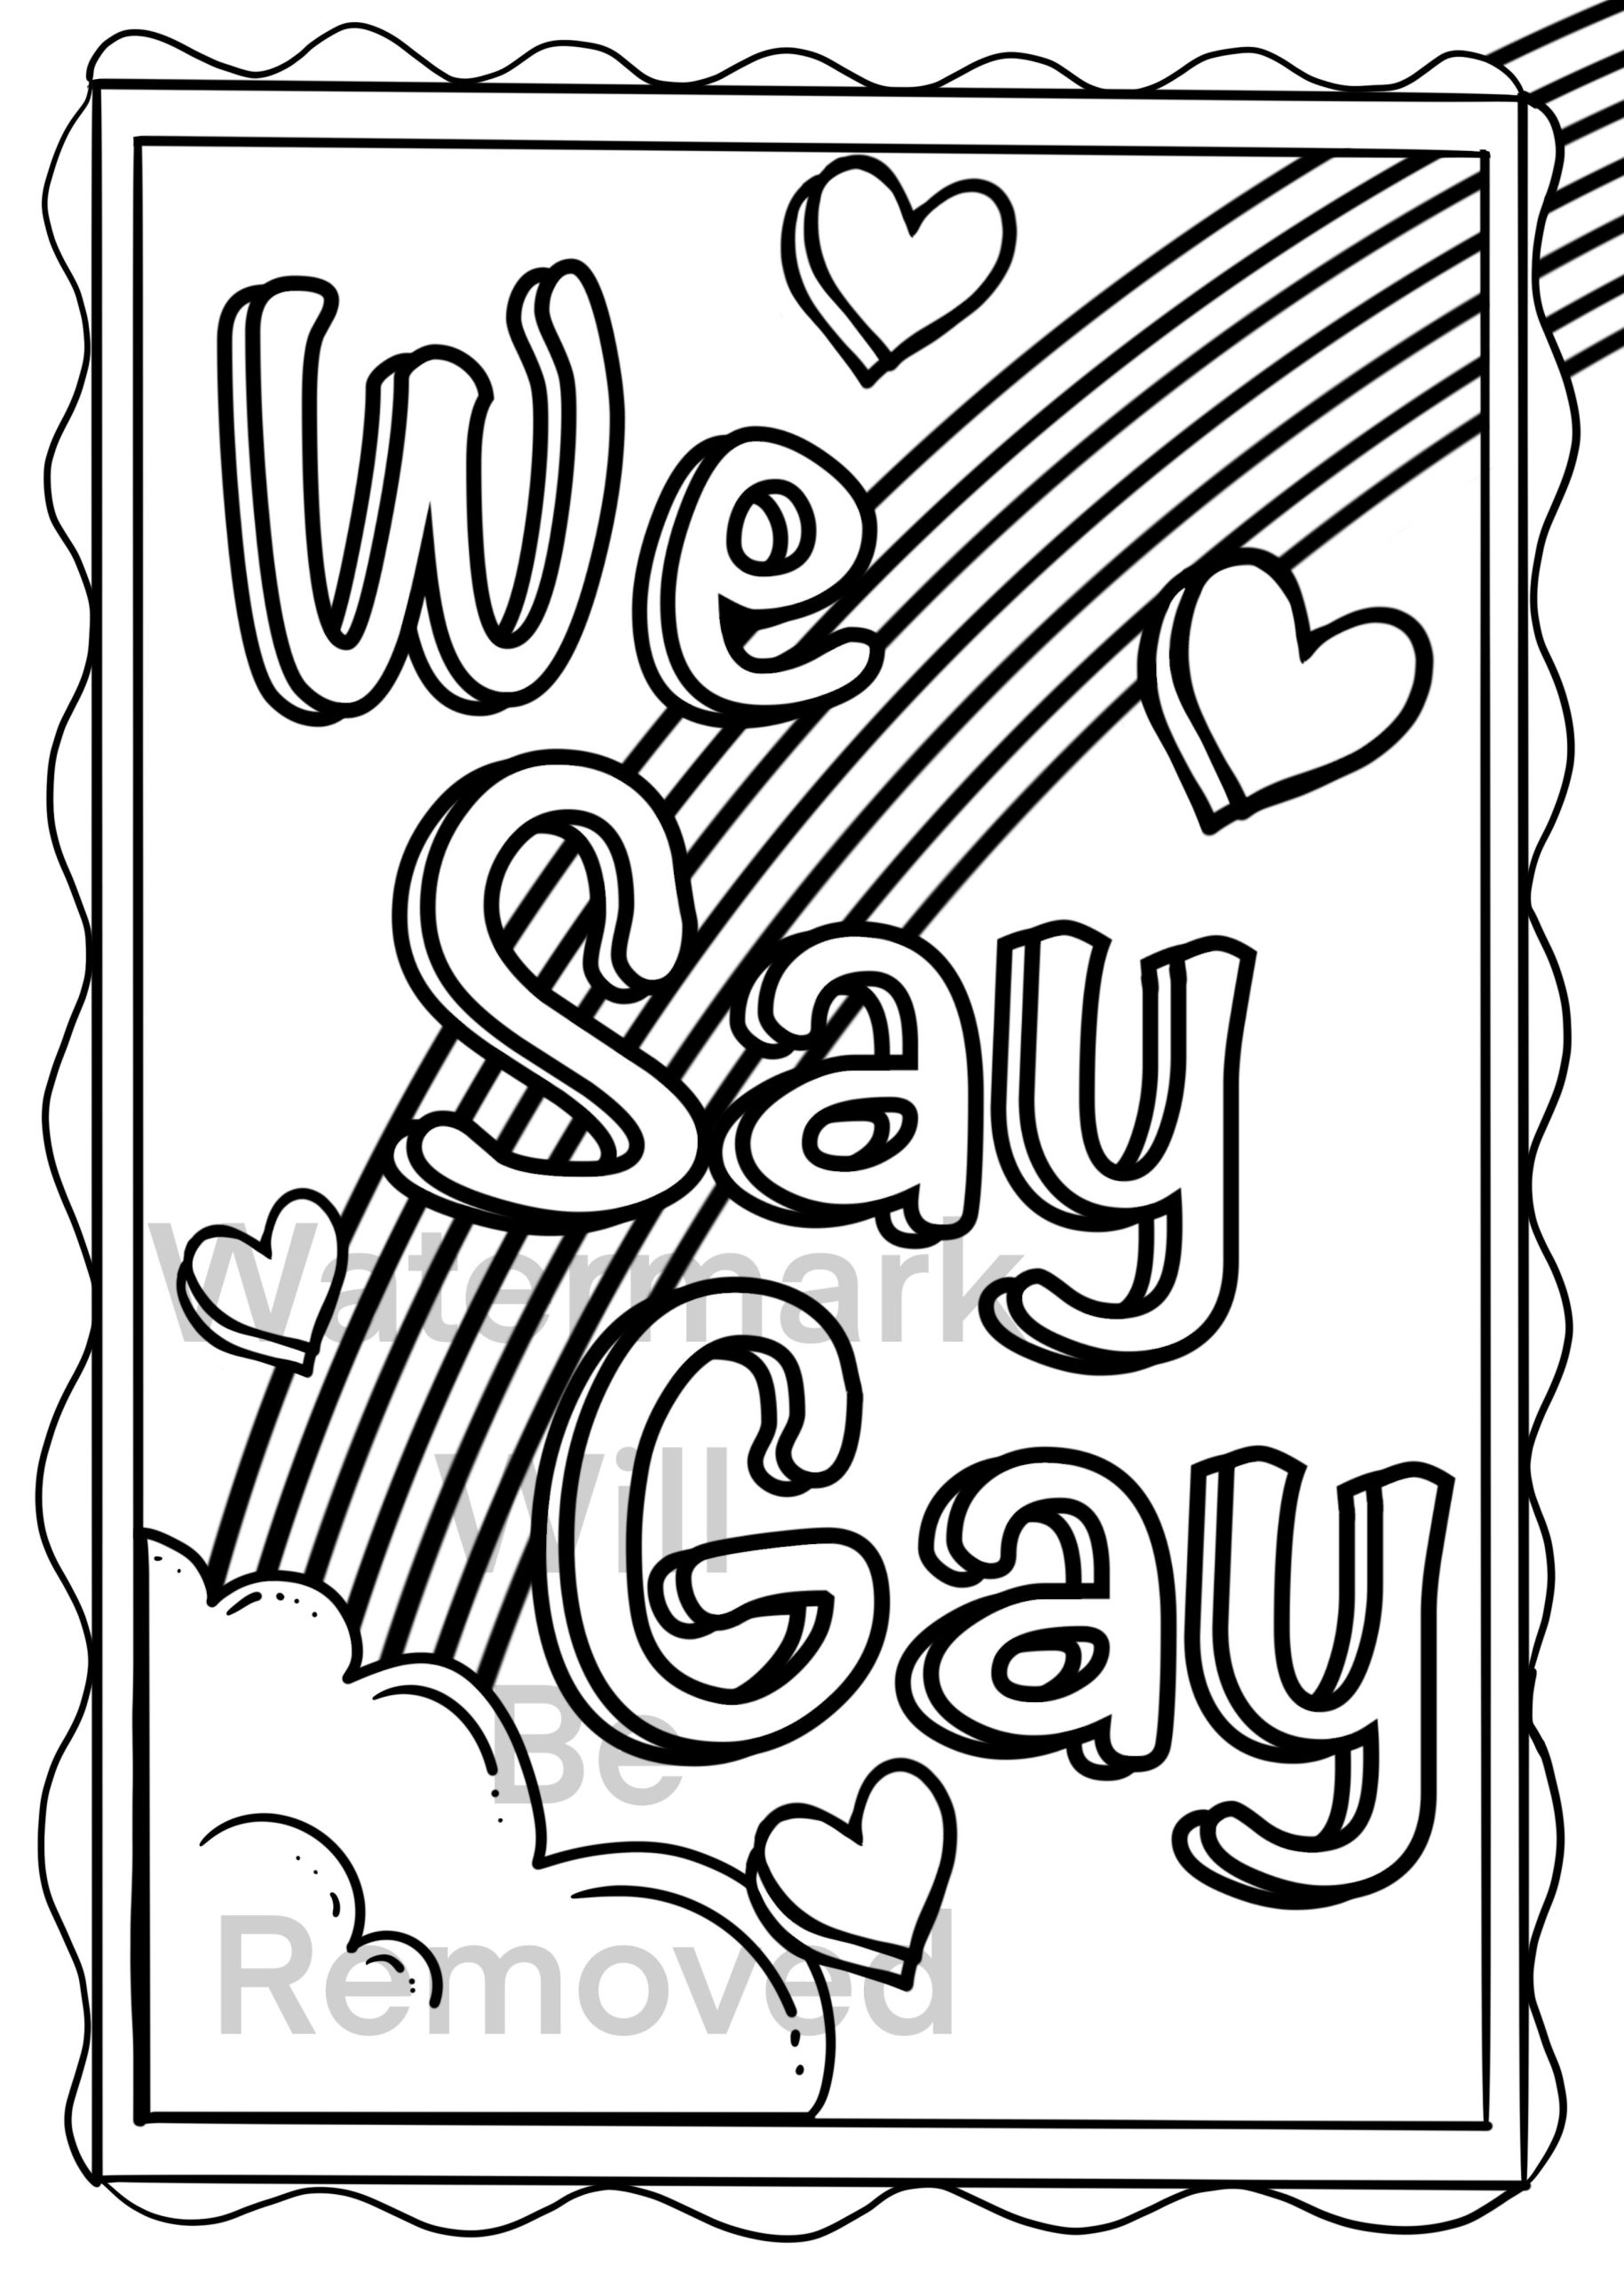 Pride month coloring pages for kids